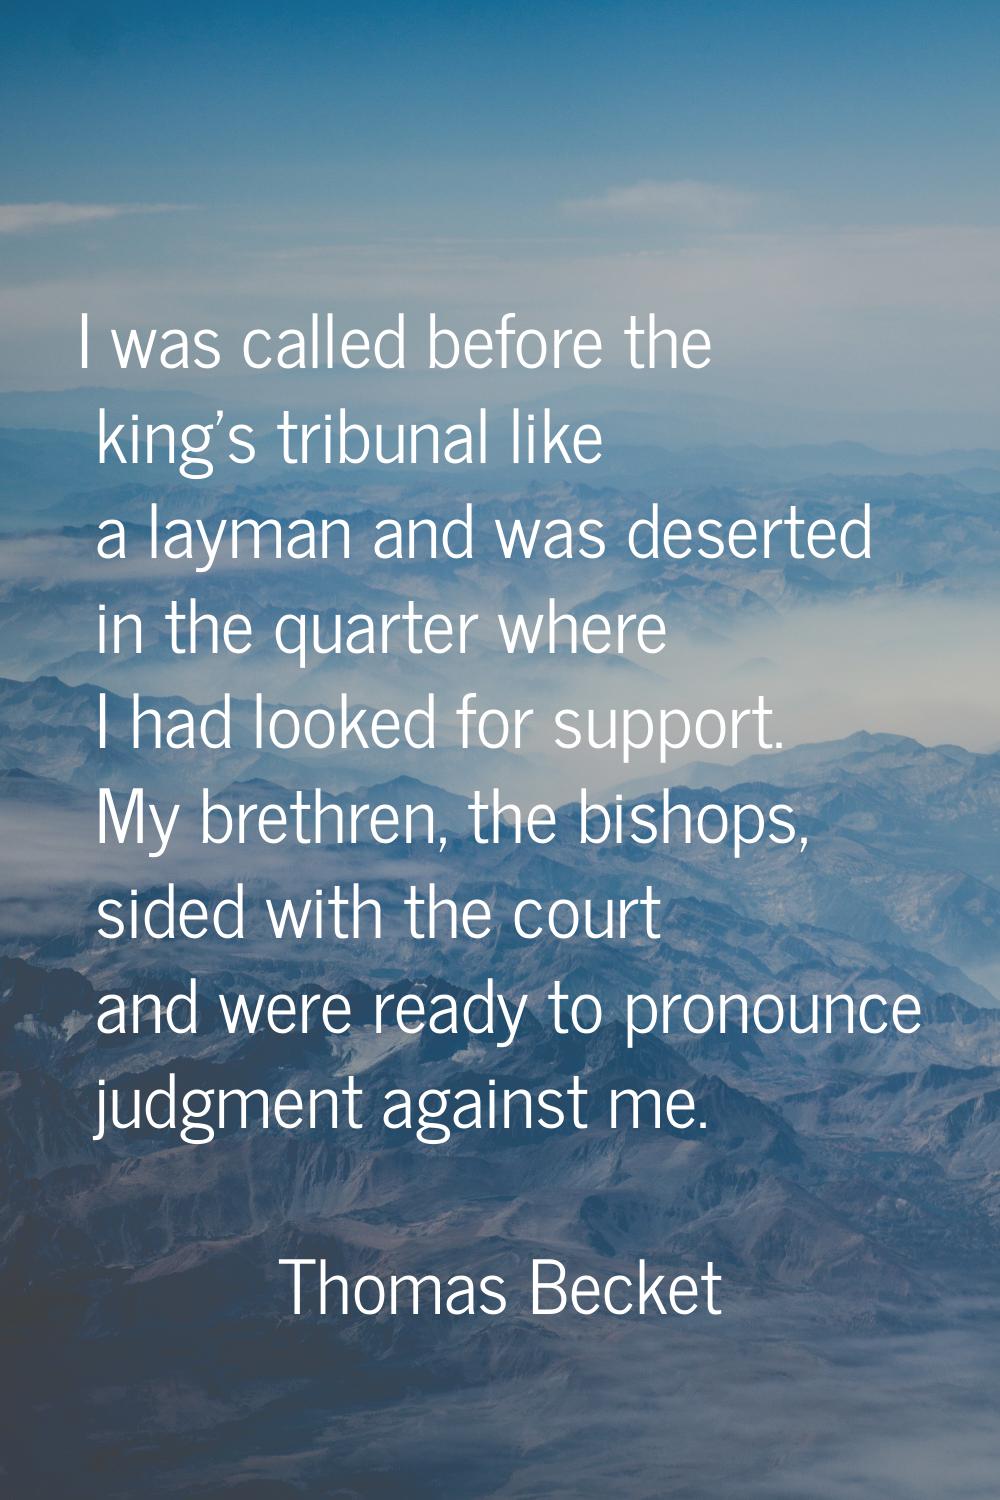 I was called before the king's tribunal like a layman and was deserted in the quarter where I had l